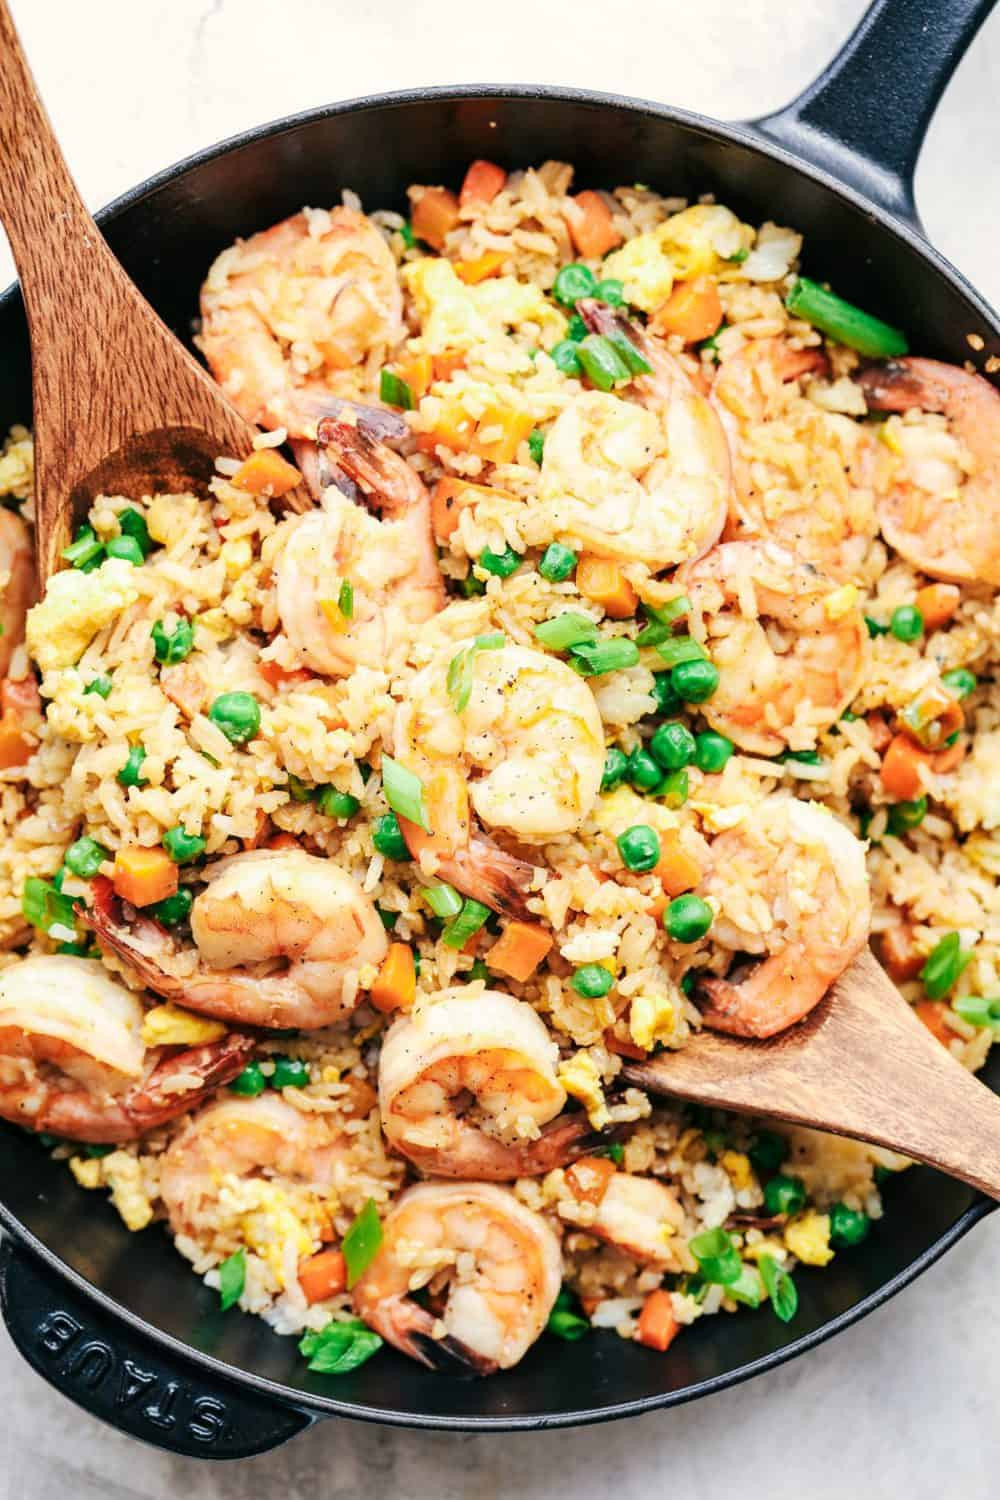 Seafood Fried Rice Recipe Chinese
 The Best Ideas for Seafood Fried Rice Recipe Chinese